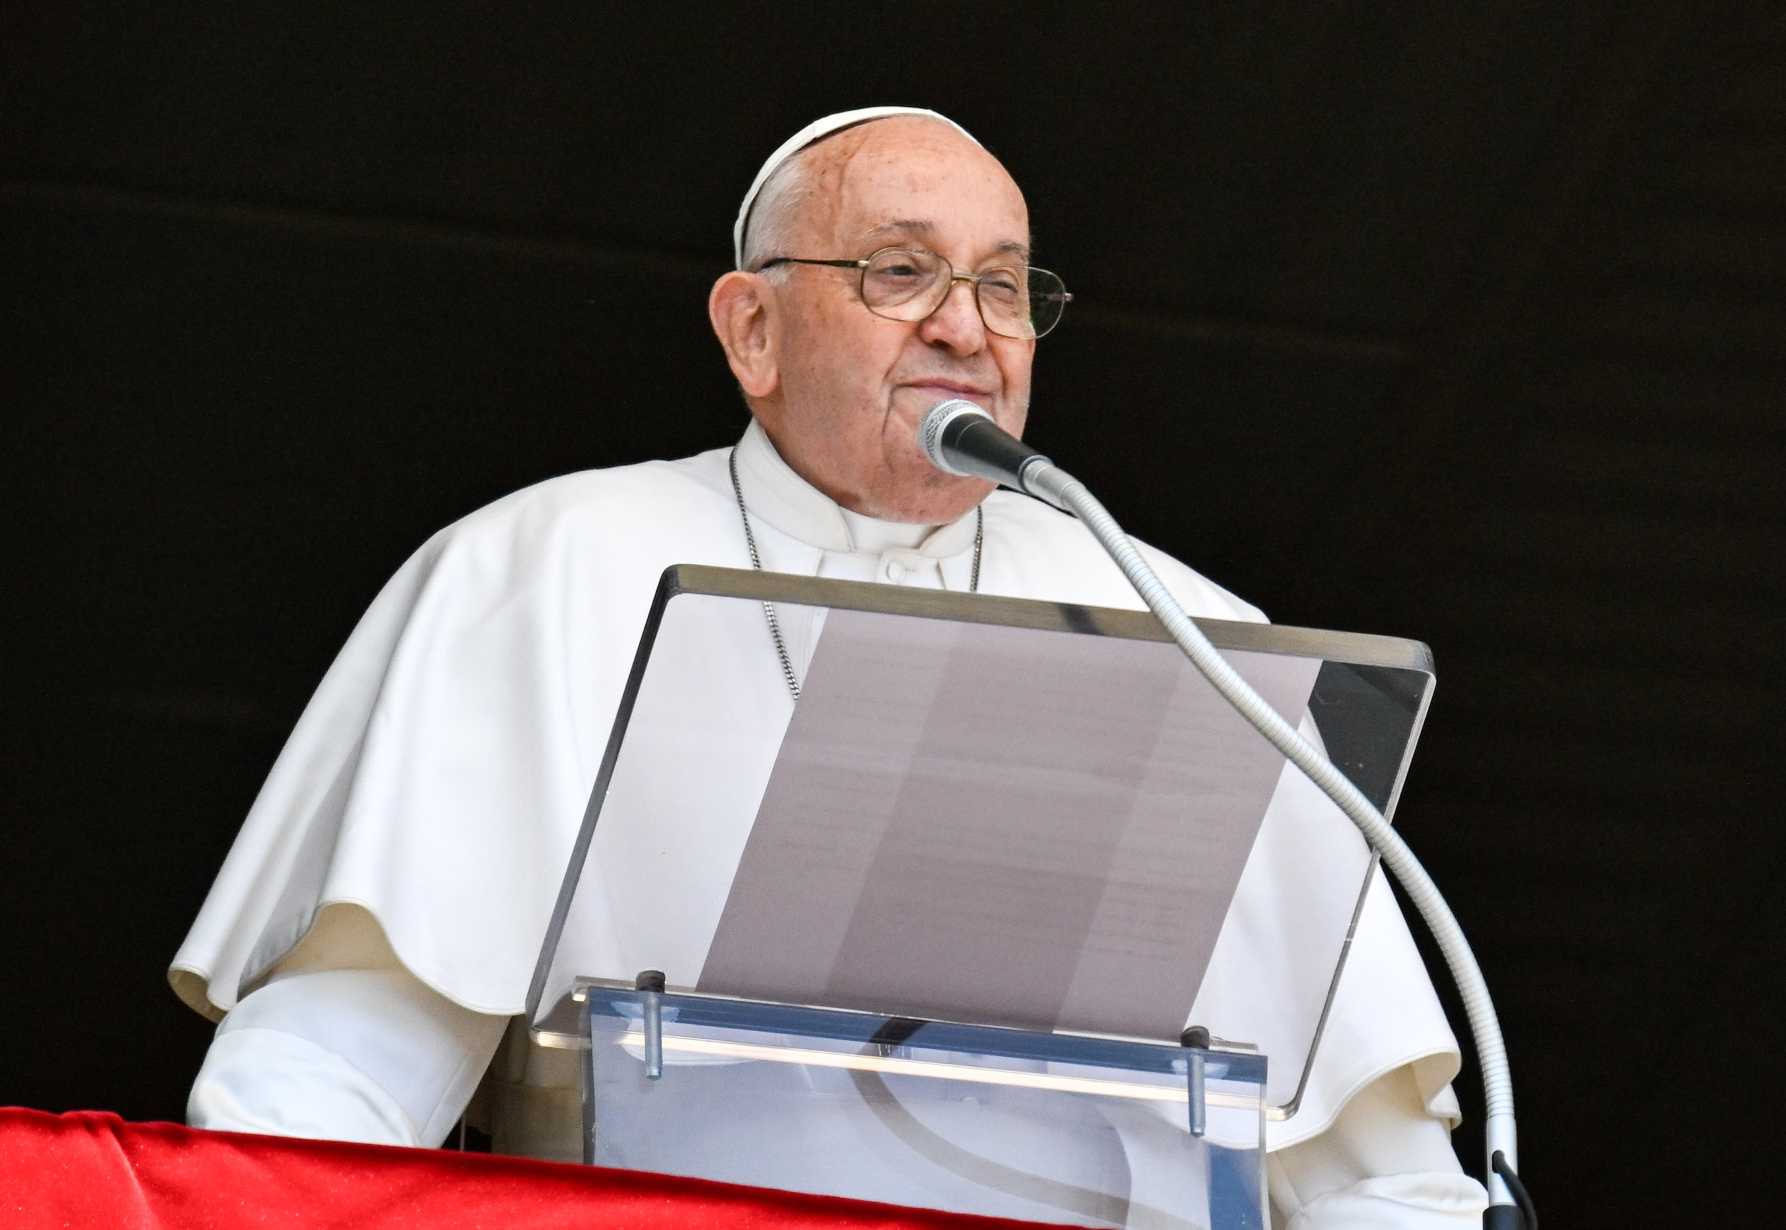 Jesus asks for faithfulness, but also friendship, pope says